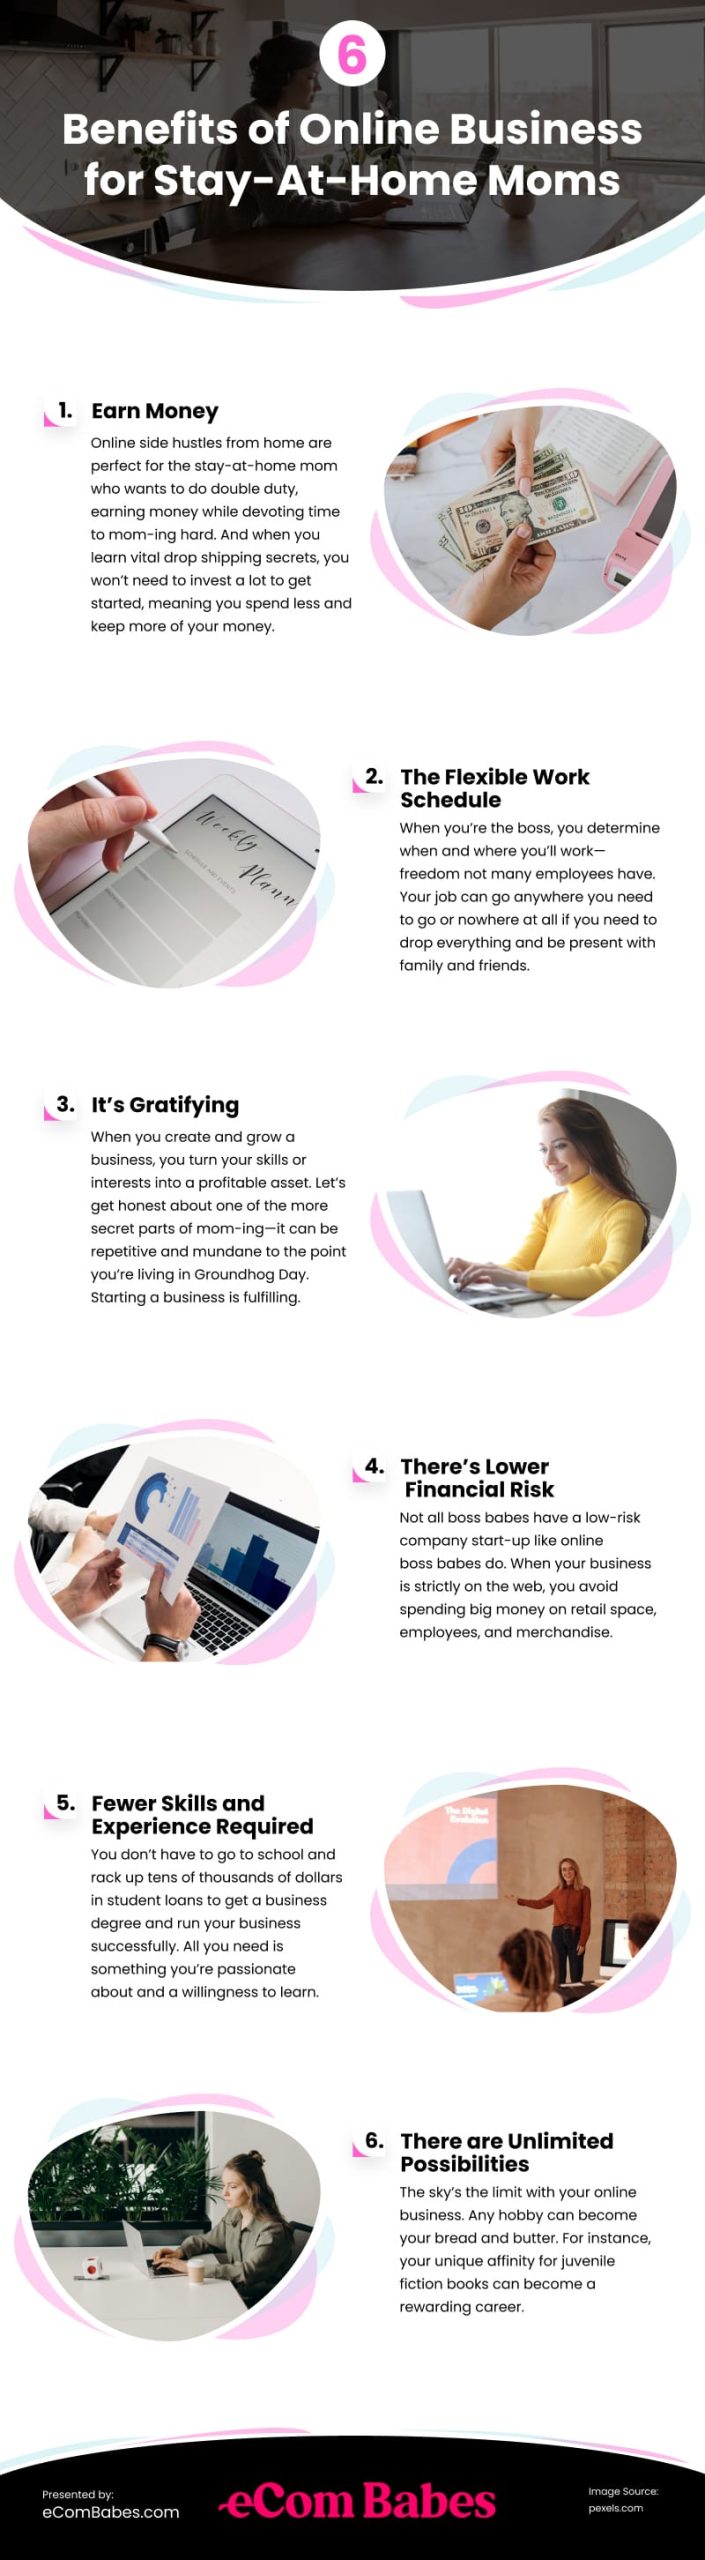 6 Benefits of Online Business for Stay-At-Home Moms Infographic